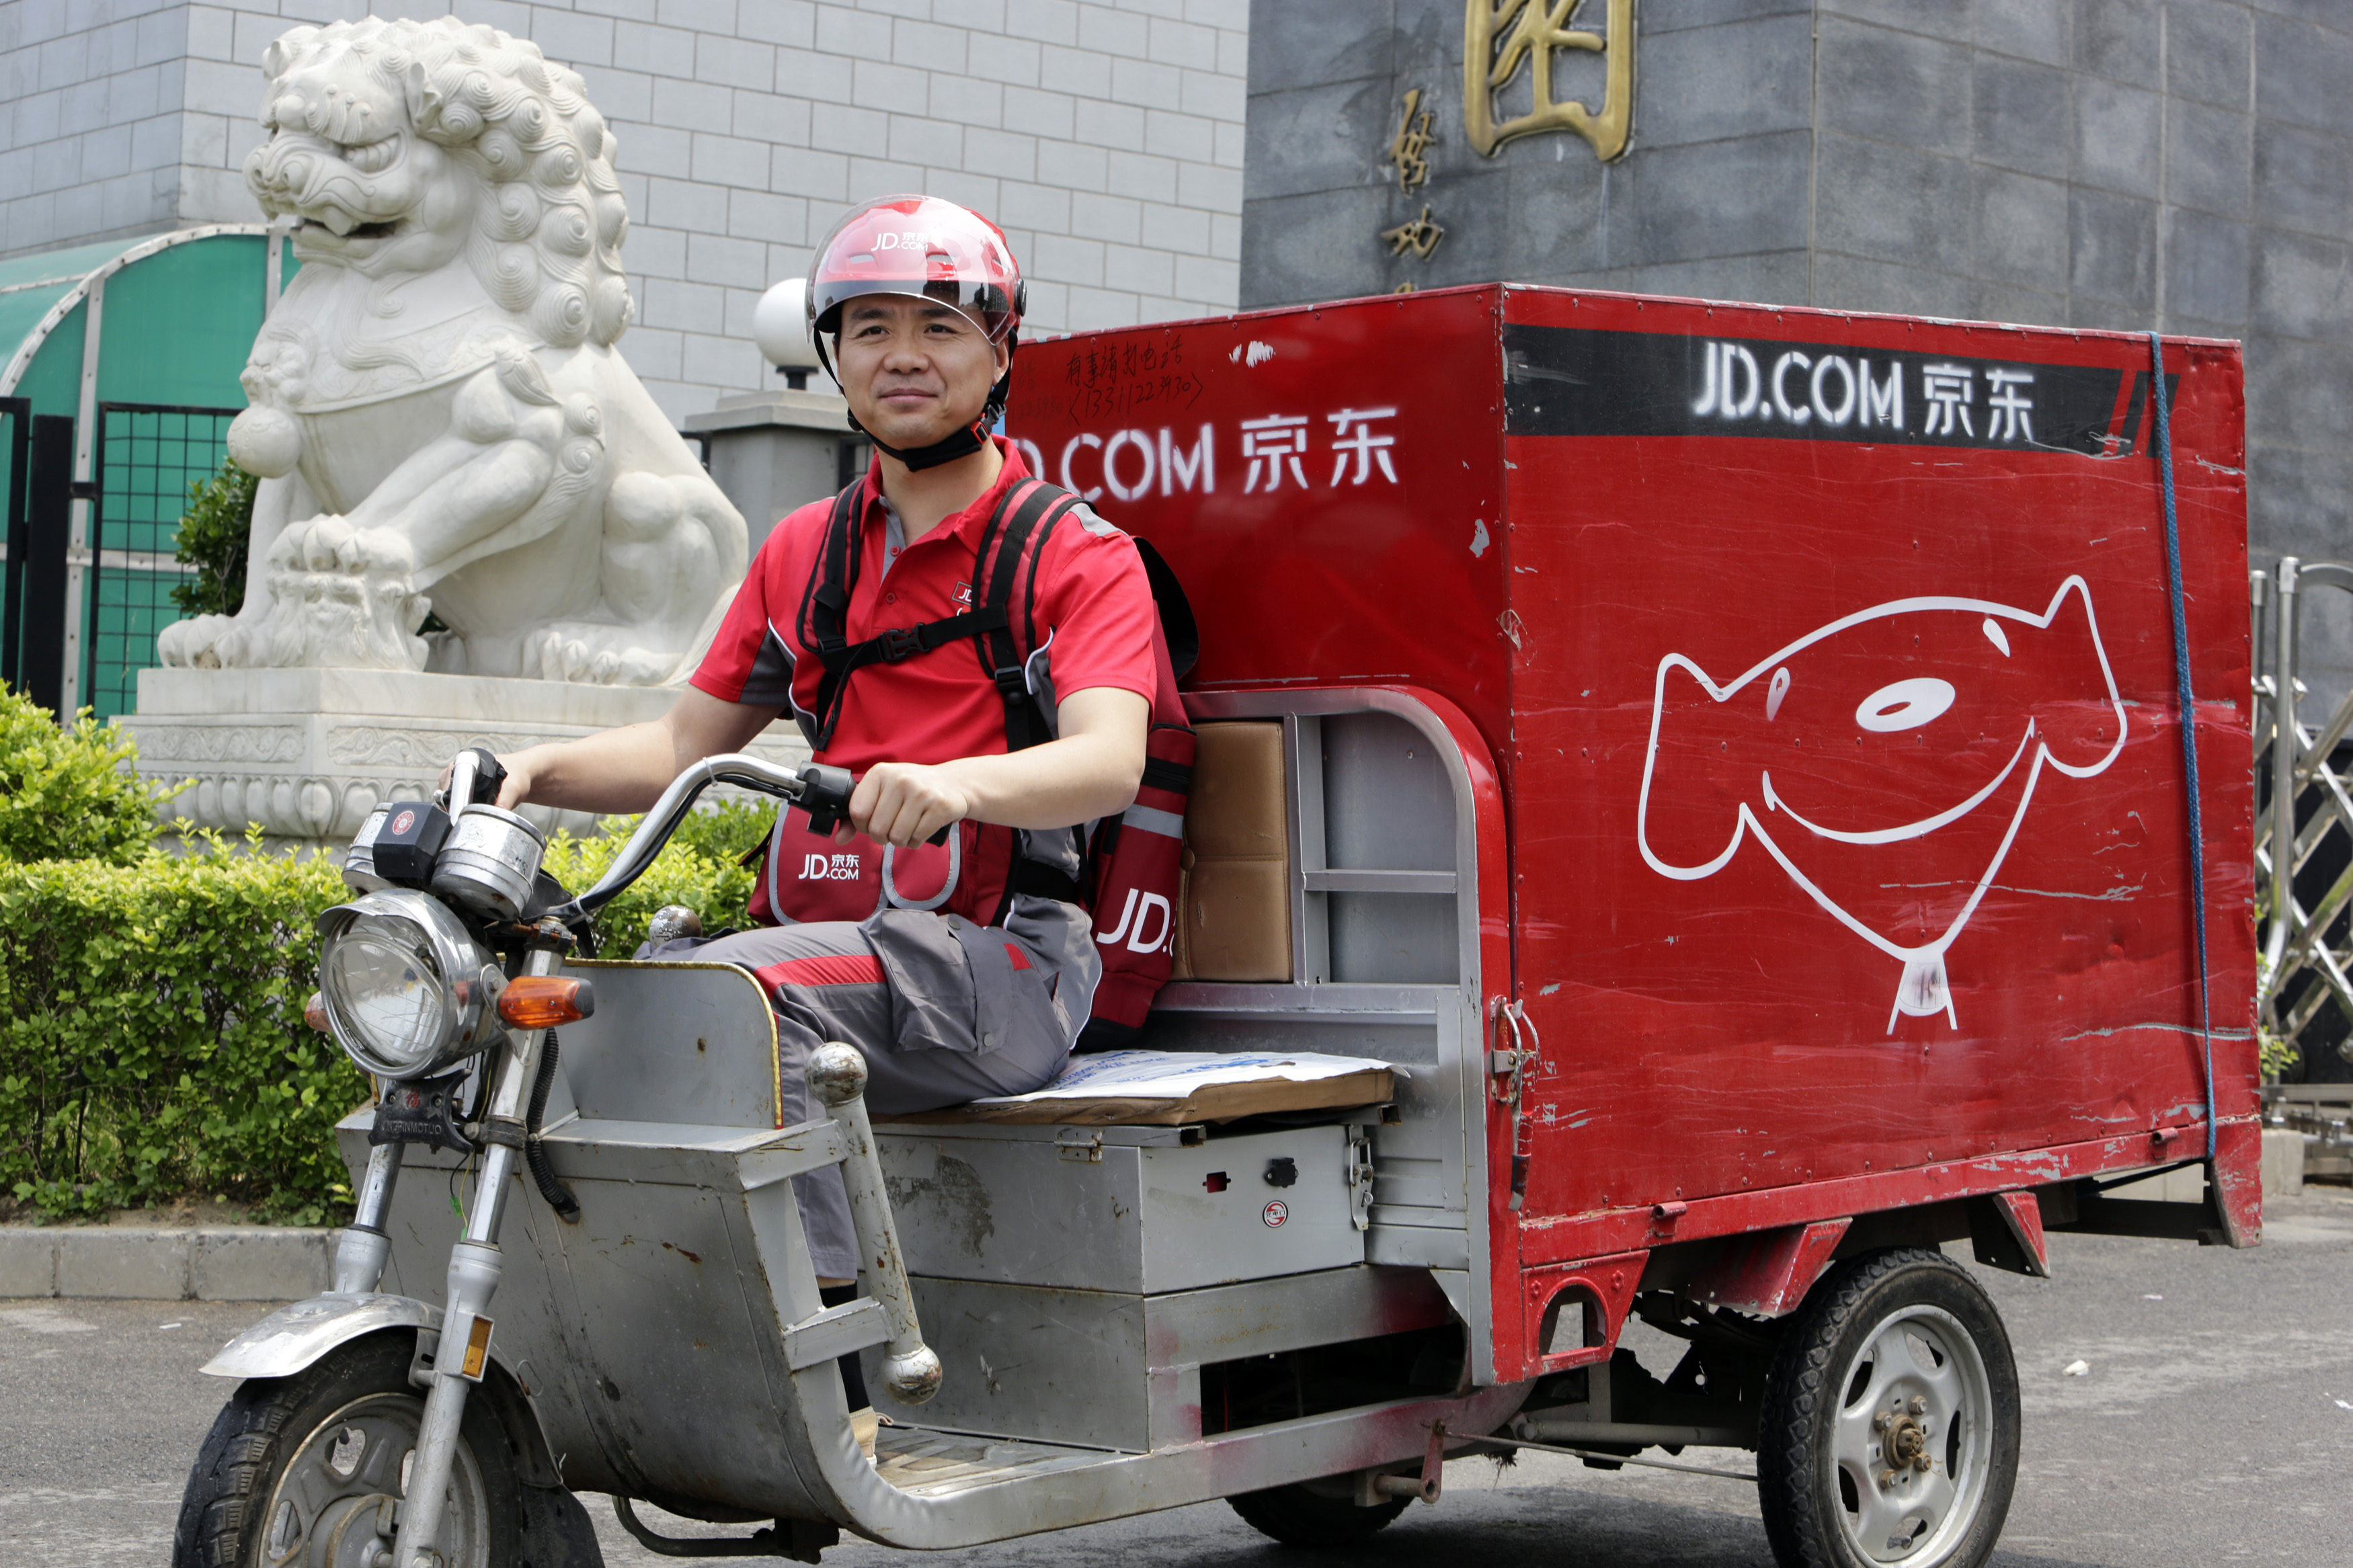 Liu, CEO and founder of China's e-commerce company JD.com, rides an electric tricycle as he makes a delivery run in Beijing